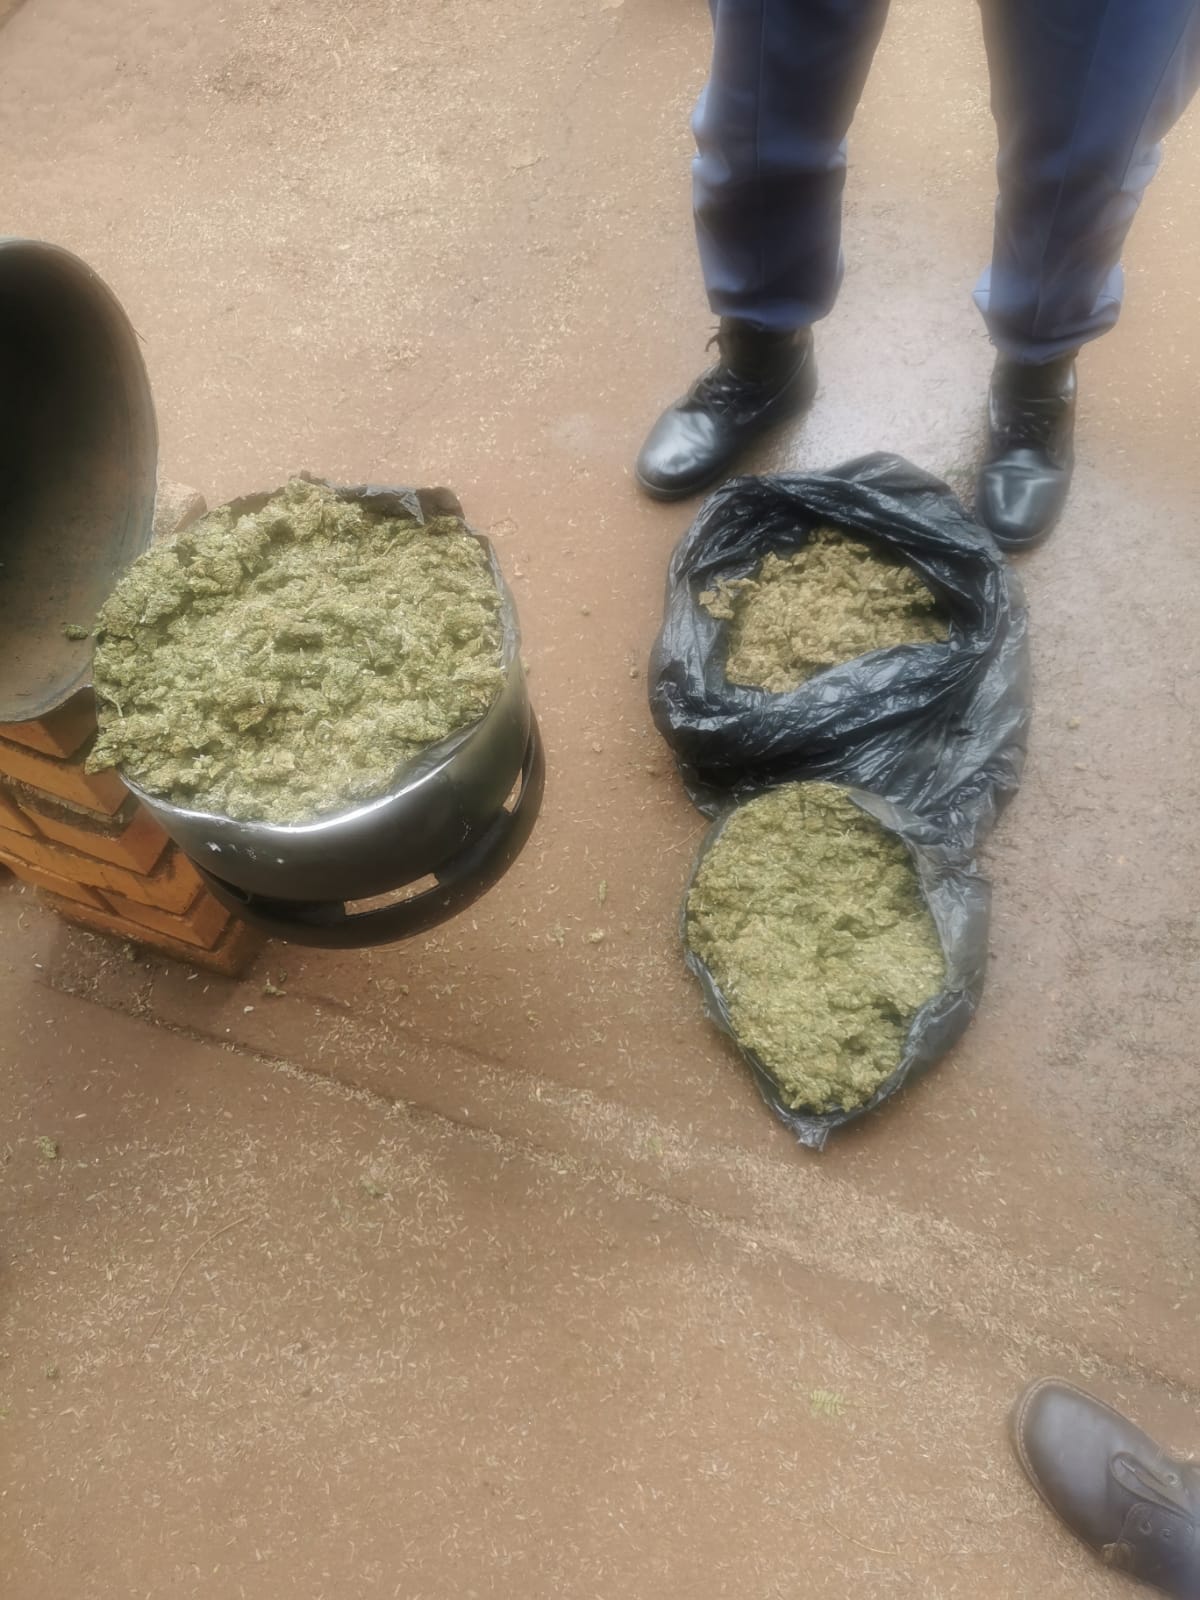 Gas cylinder used as new tactic by alleged dagga traffickers